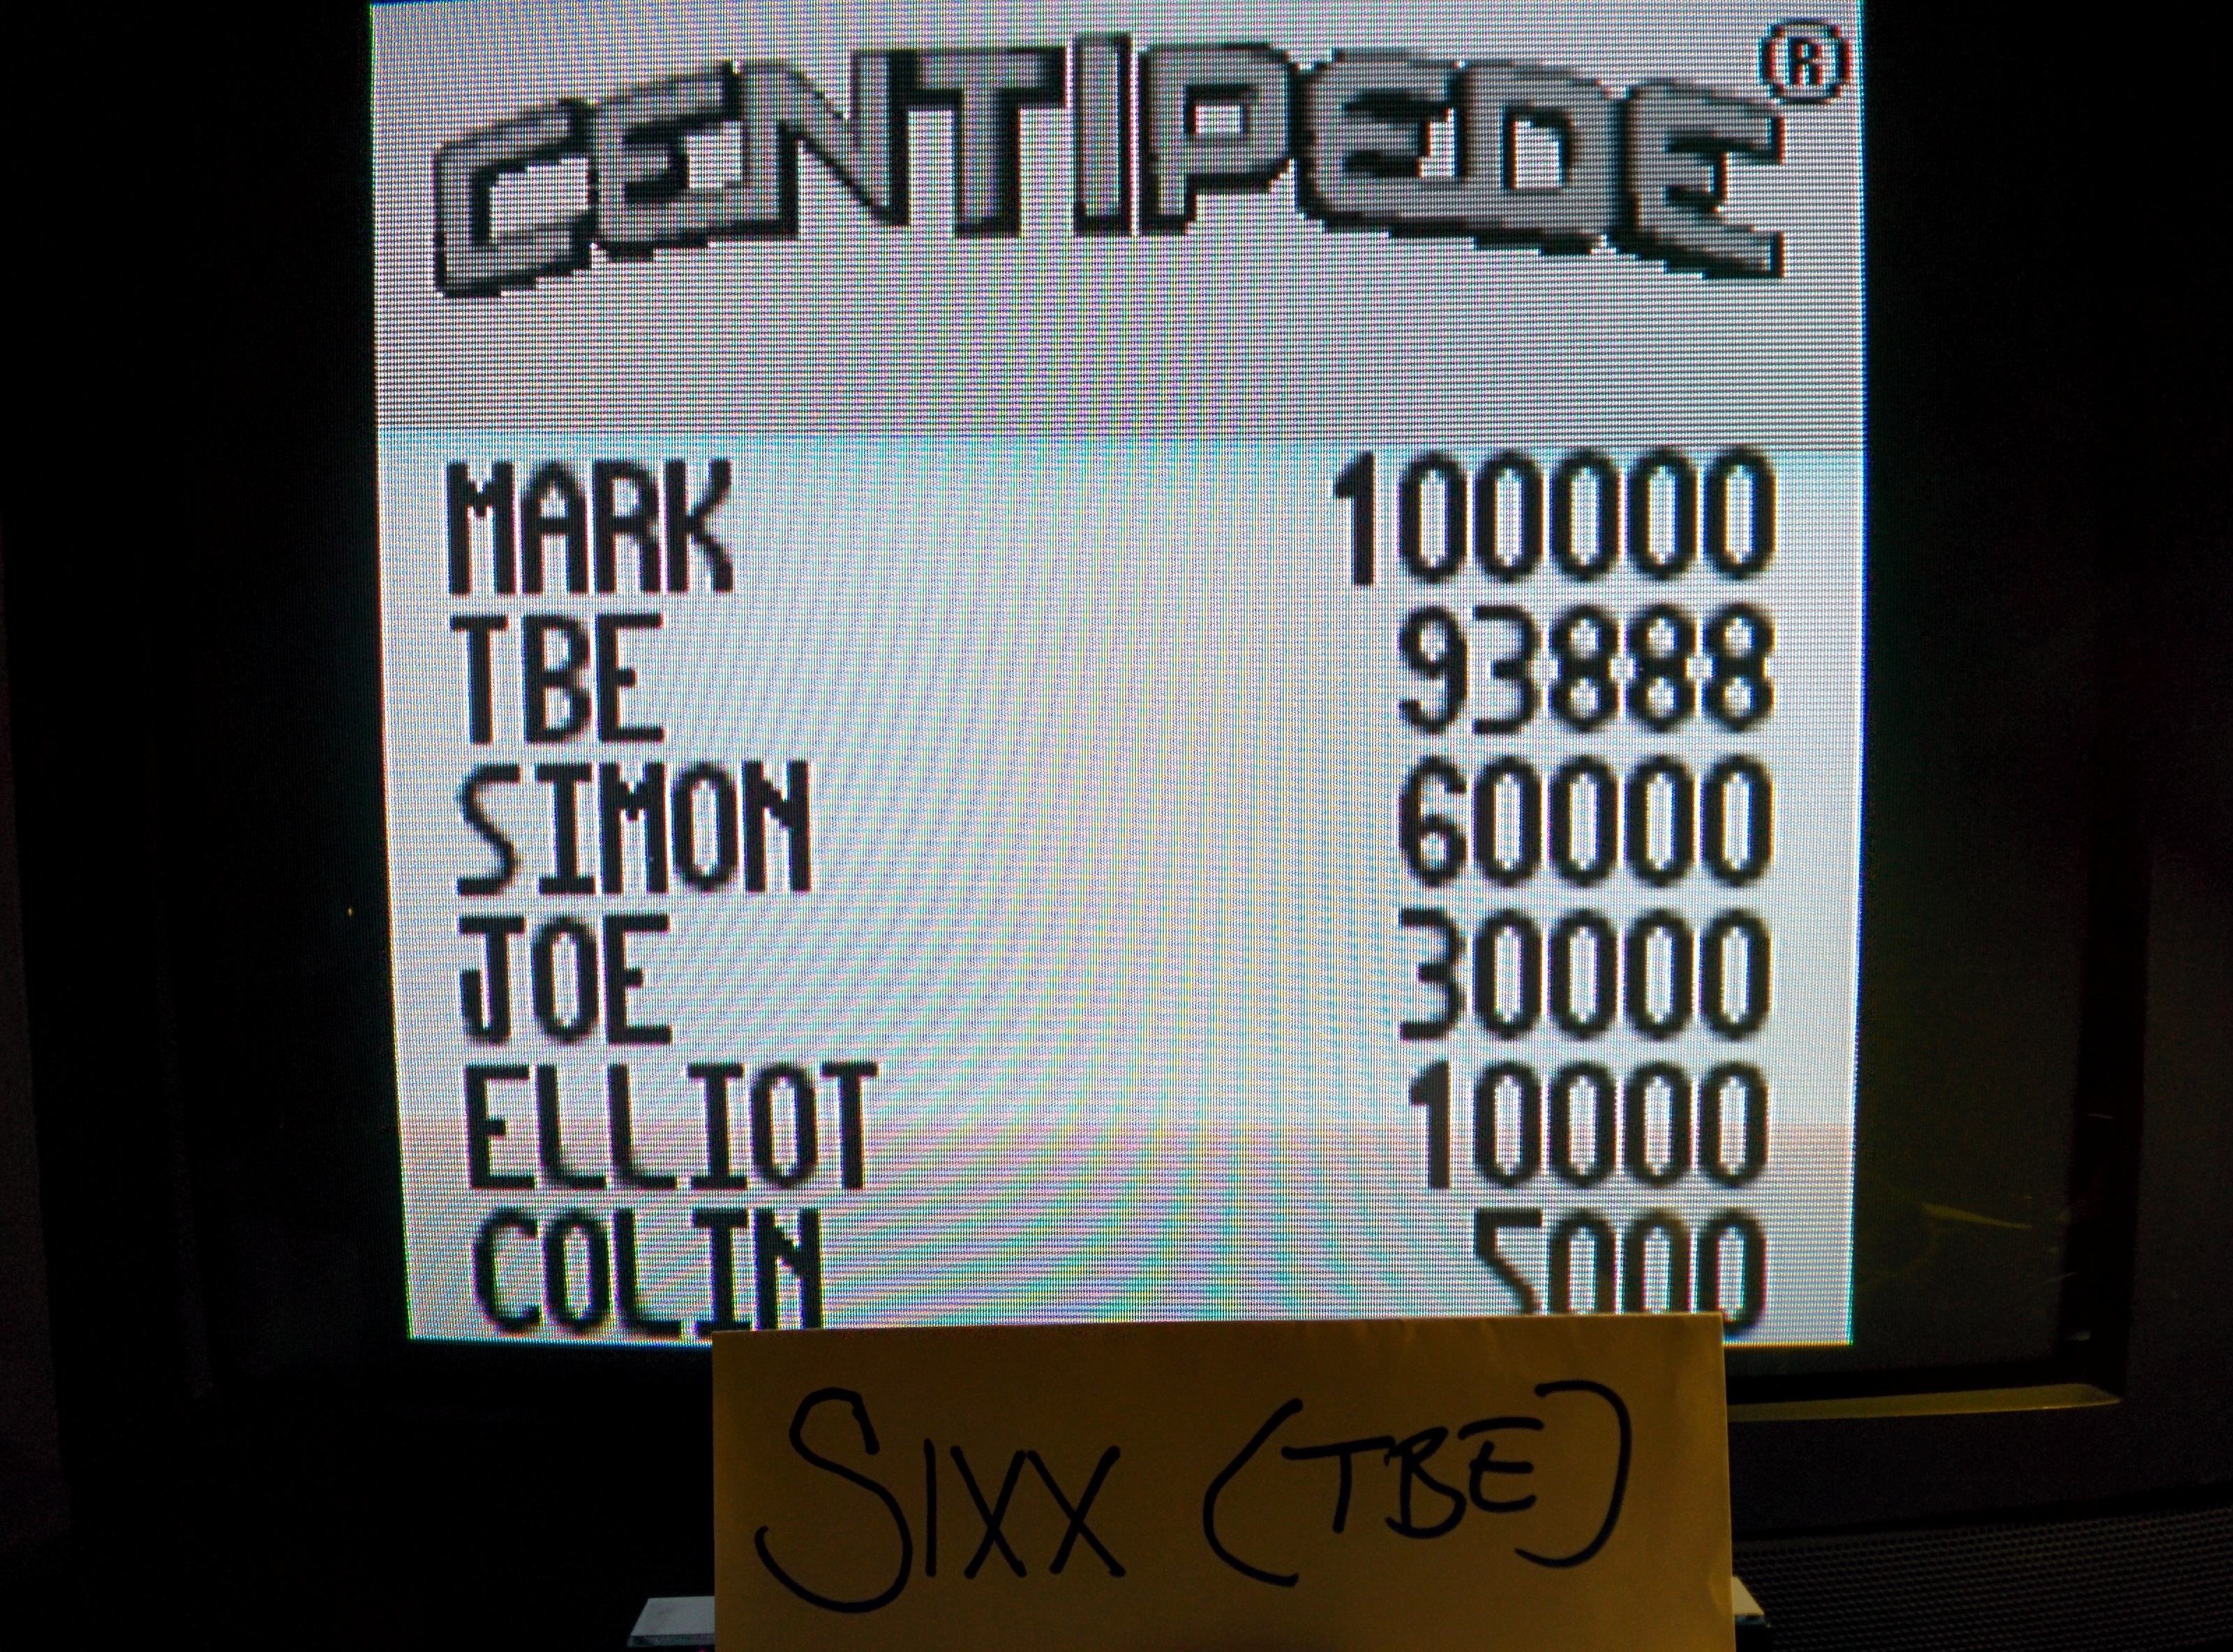 Sixx: Centipede (Game Boy Emulated) 93,888 points on 2014-04-25 18:51:51